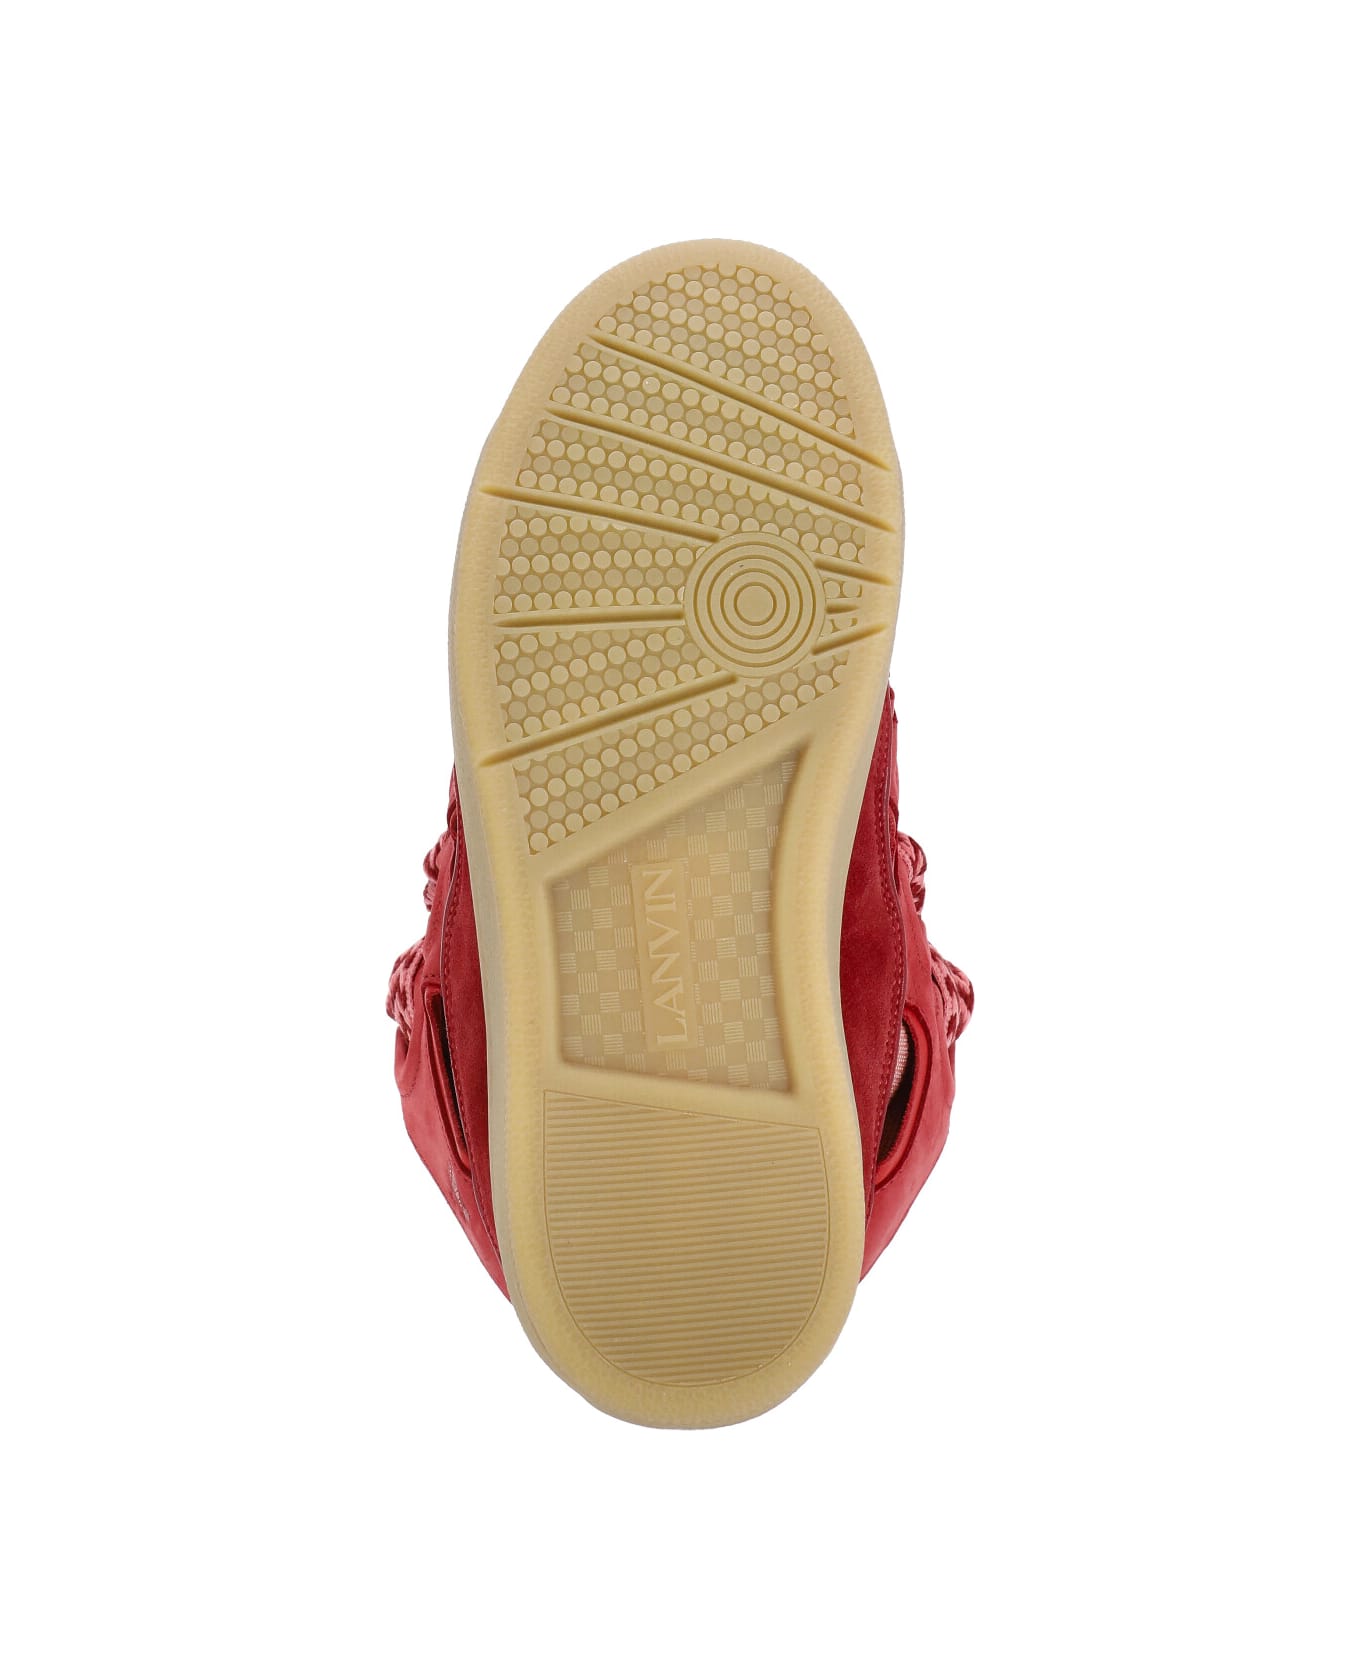 Lanvin Curb Sneakers - Red